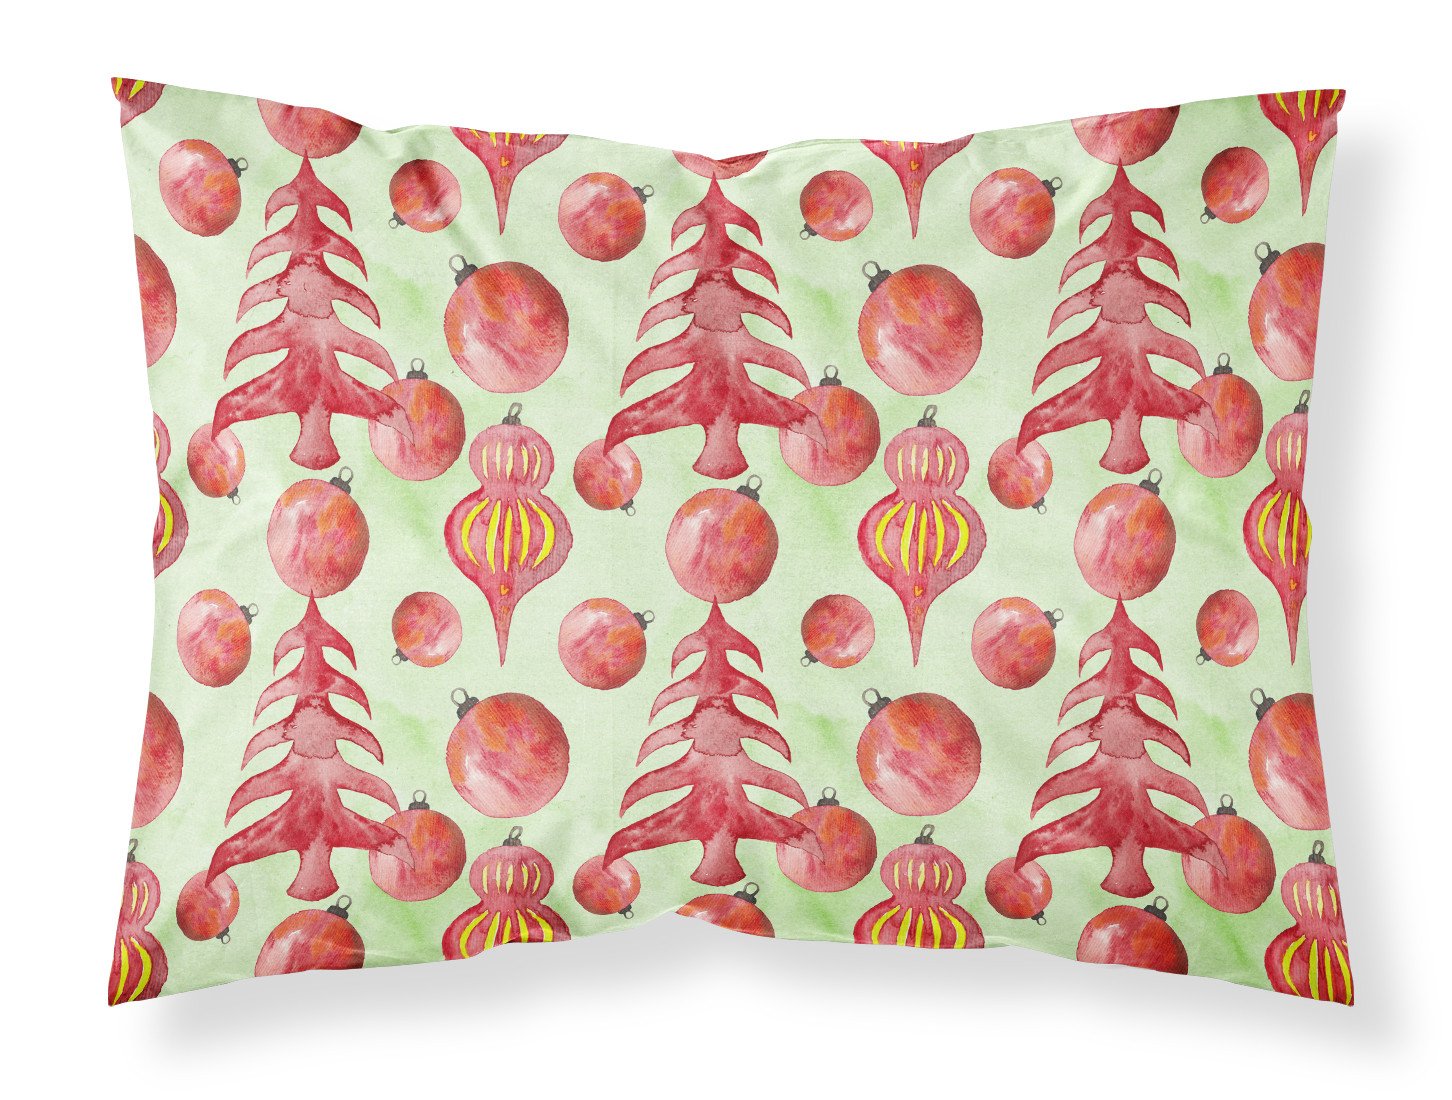 Red Christmas Tree and Ornaments Fabric Standard Pillowcase BB7483PILLOWCASE by Caroline's Treasures